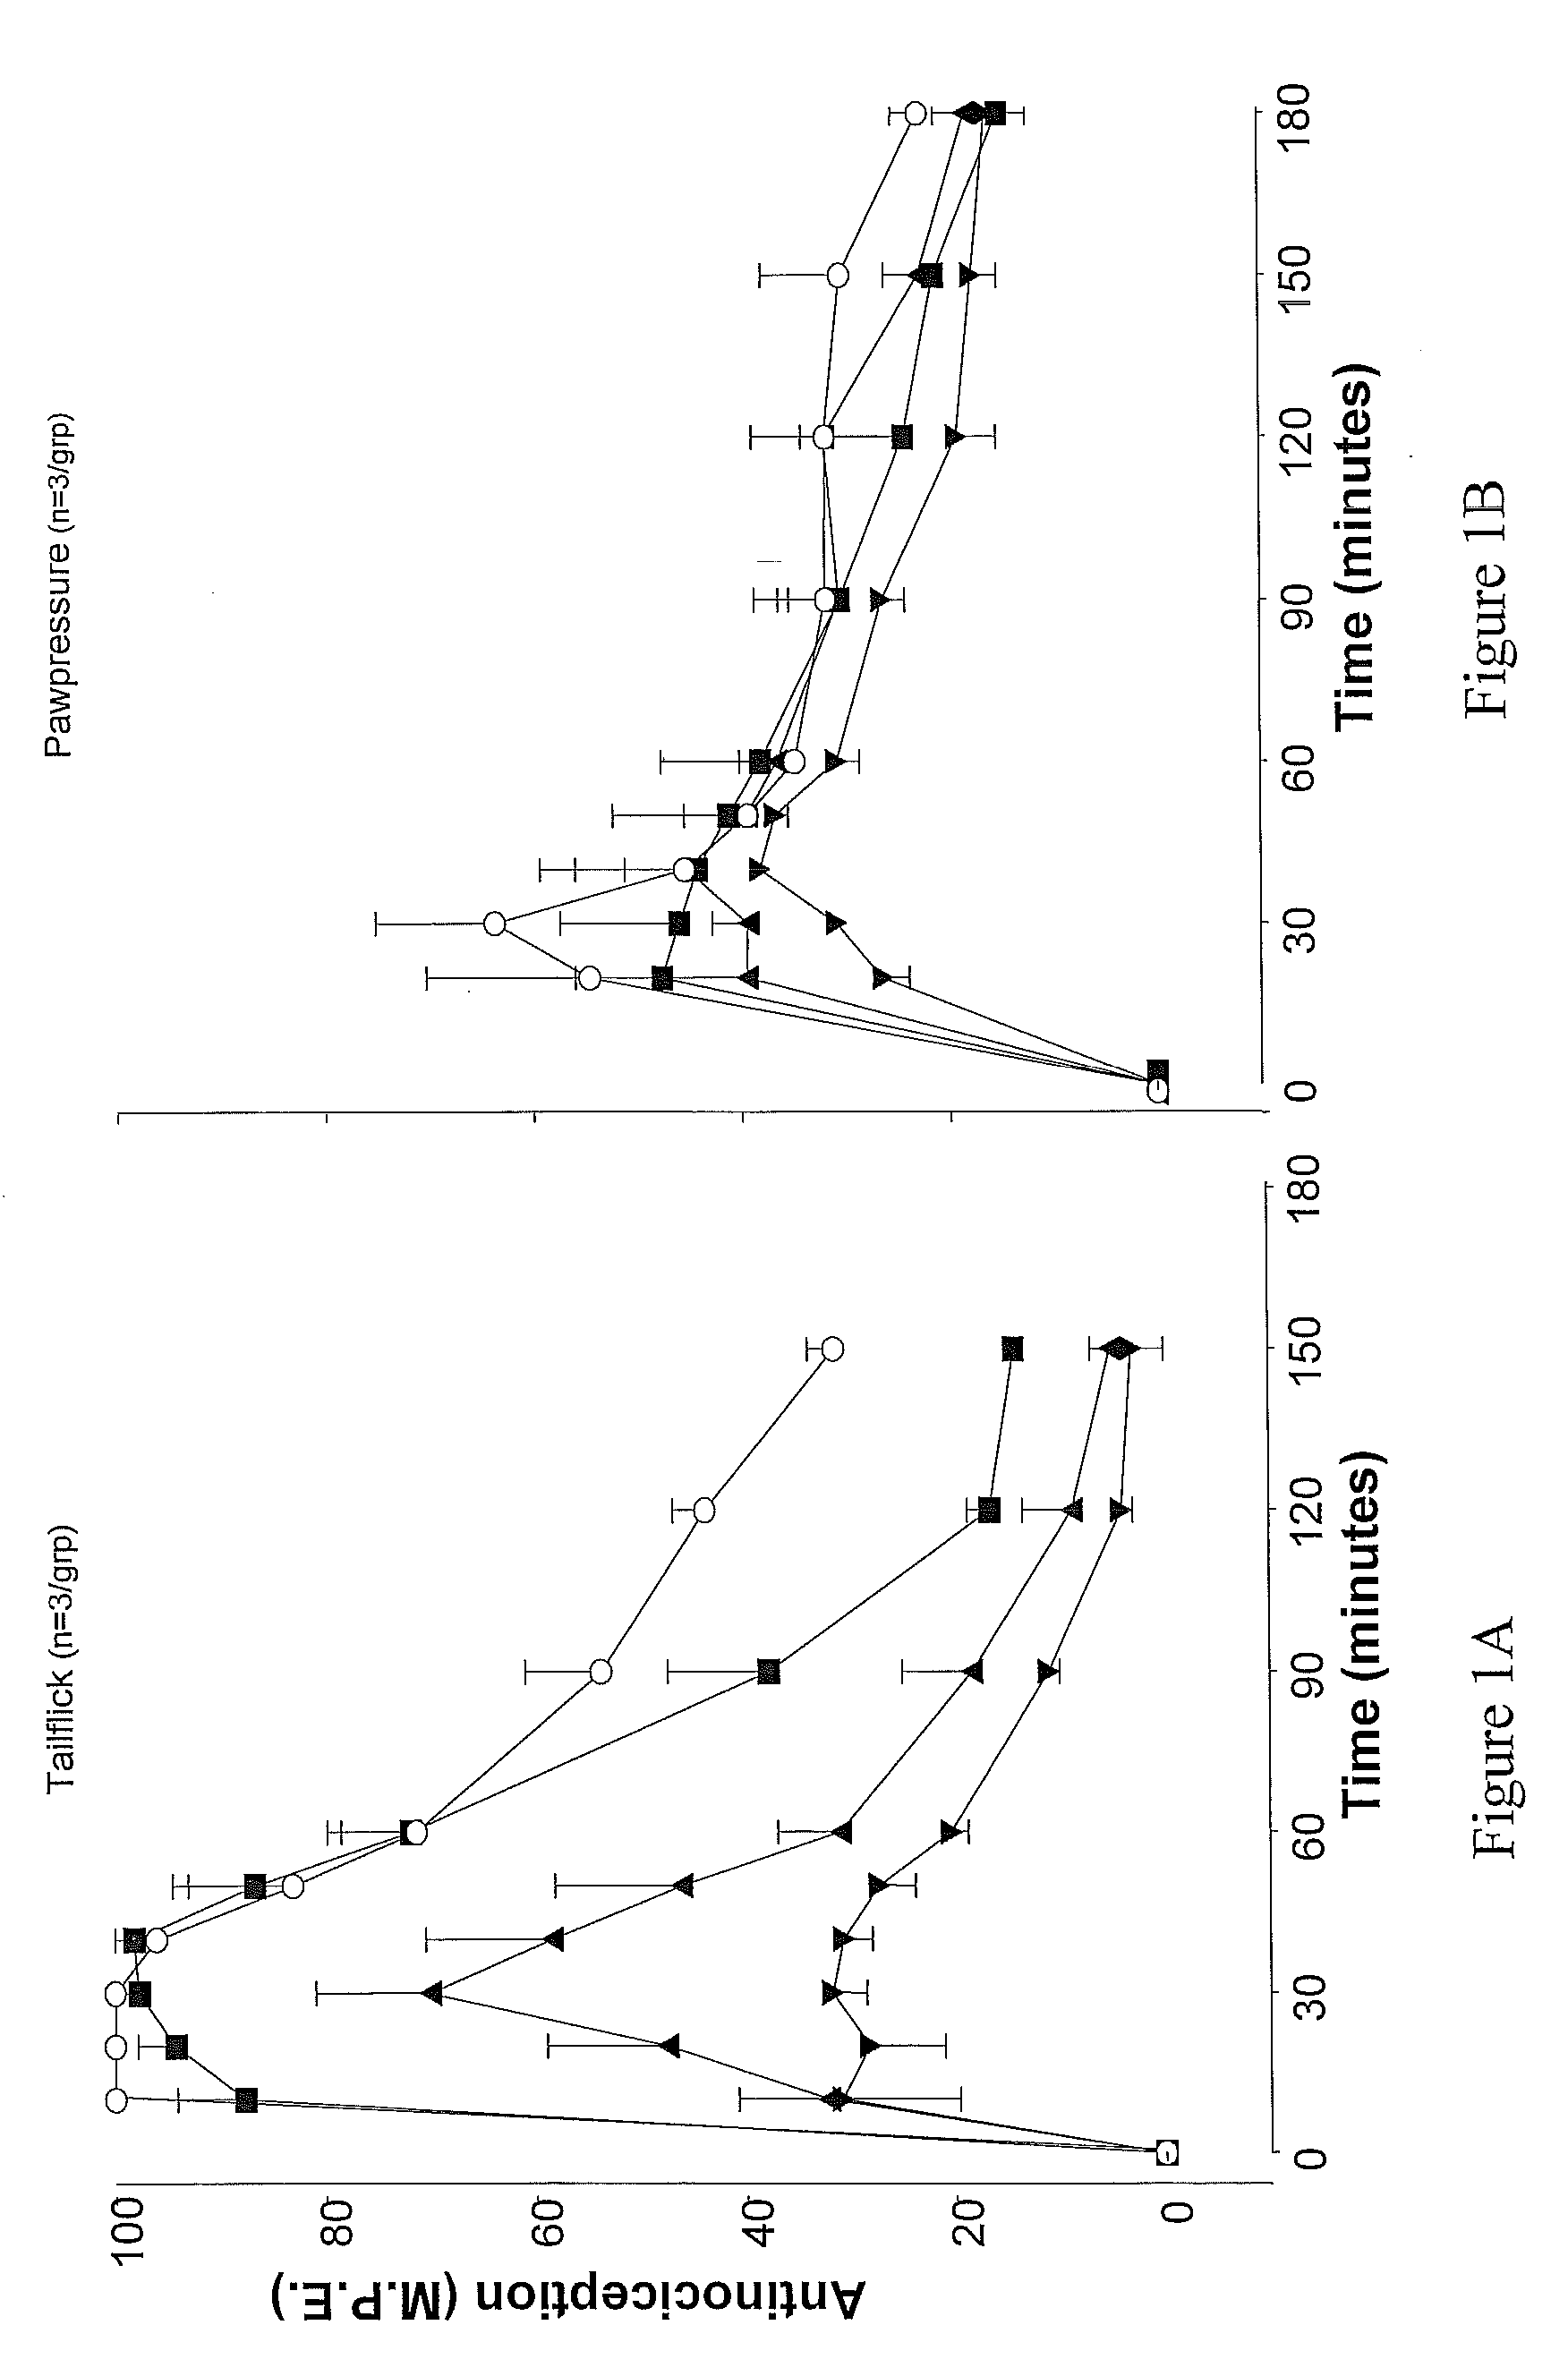 Methods and Therapies for Potentiating a Therapeutic Action of an Alpha-2 Adrenergic Receptor Agonist and Inhibiting and/or Reversing Tolerance to Alpha-2 Adrenergic Receptor Agonists